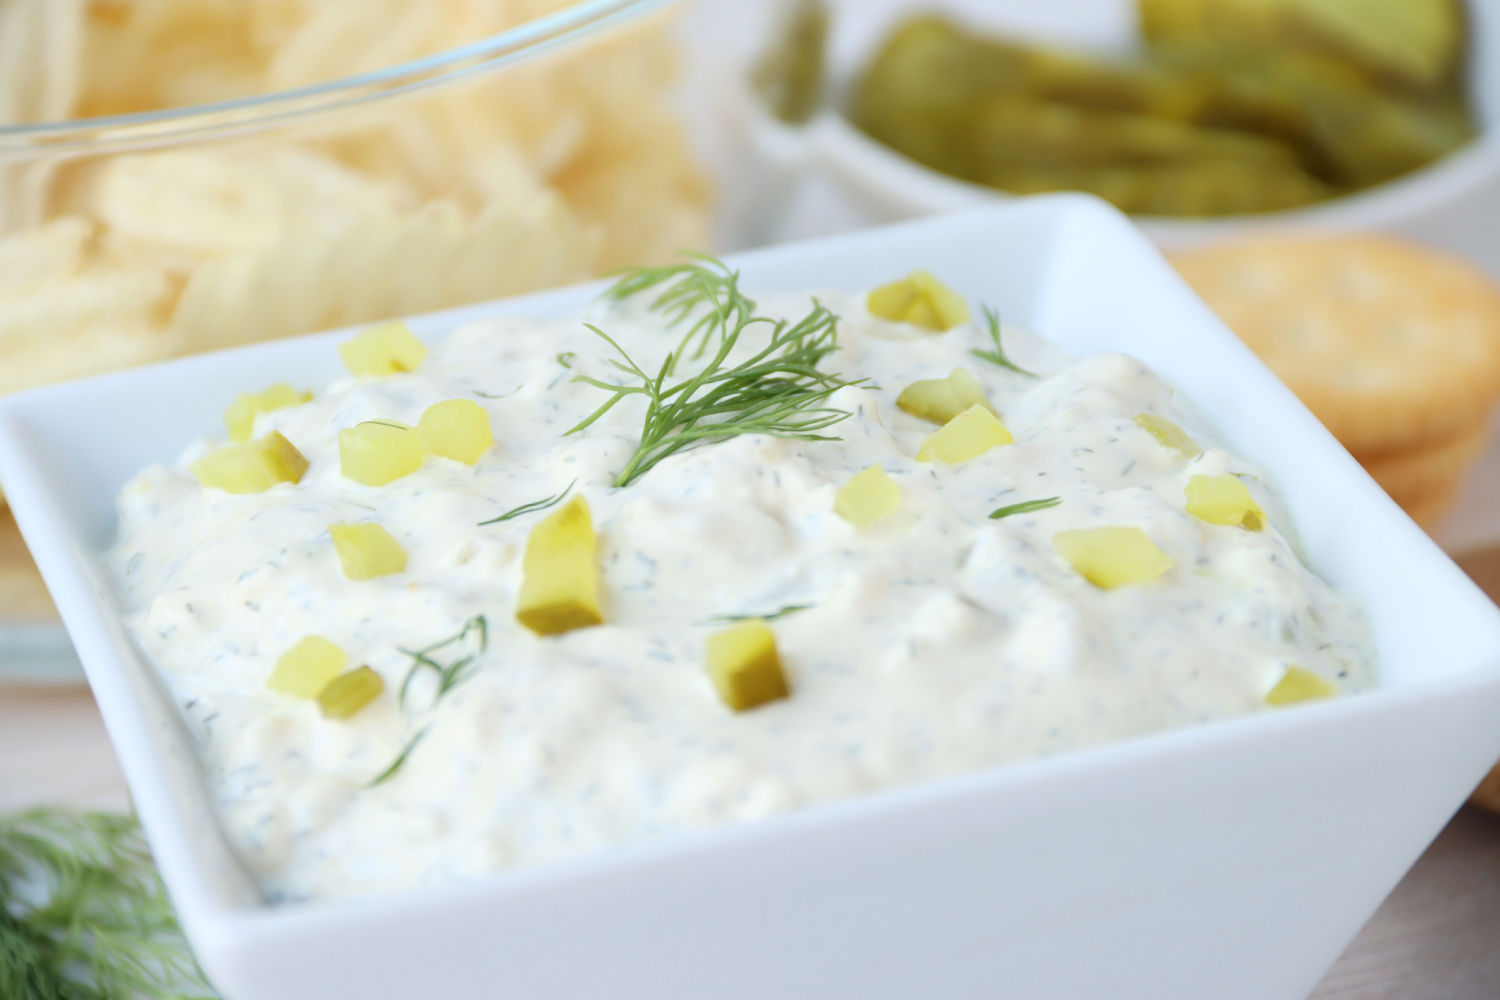 Bowl of dip with pieces of pickle and fresh dill